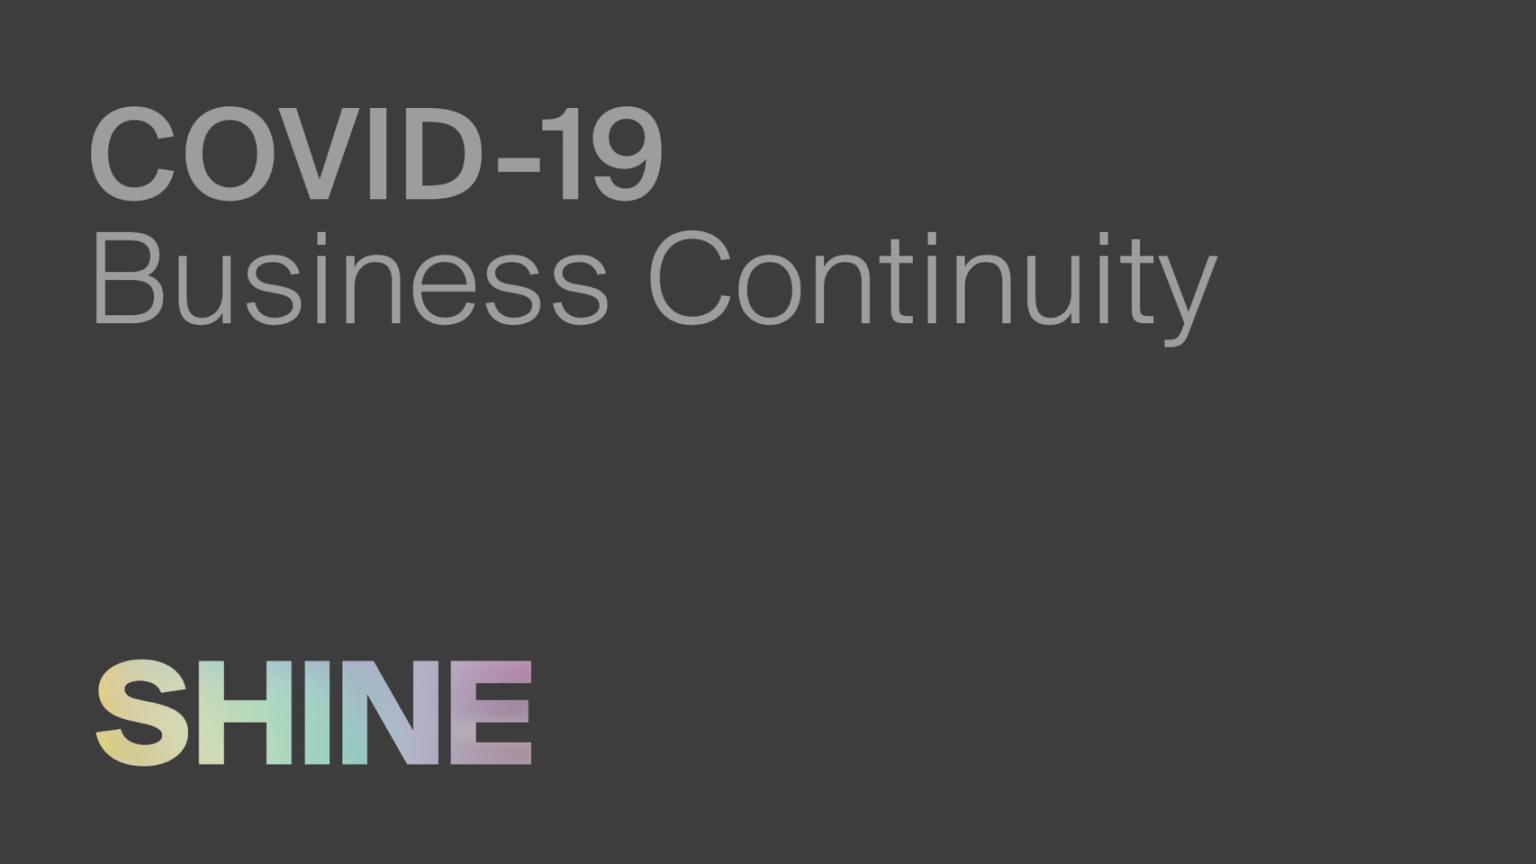 COVID-19 Business Continuity